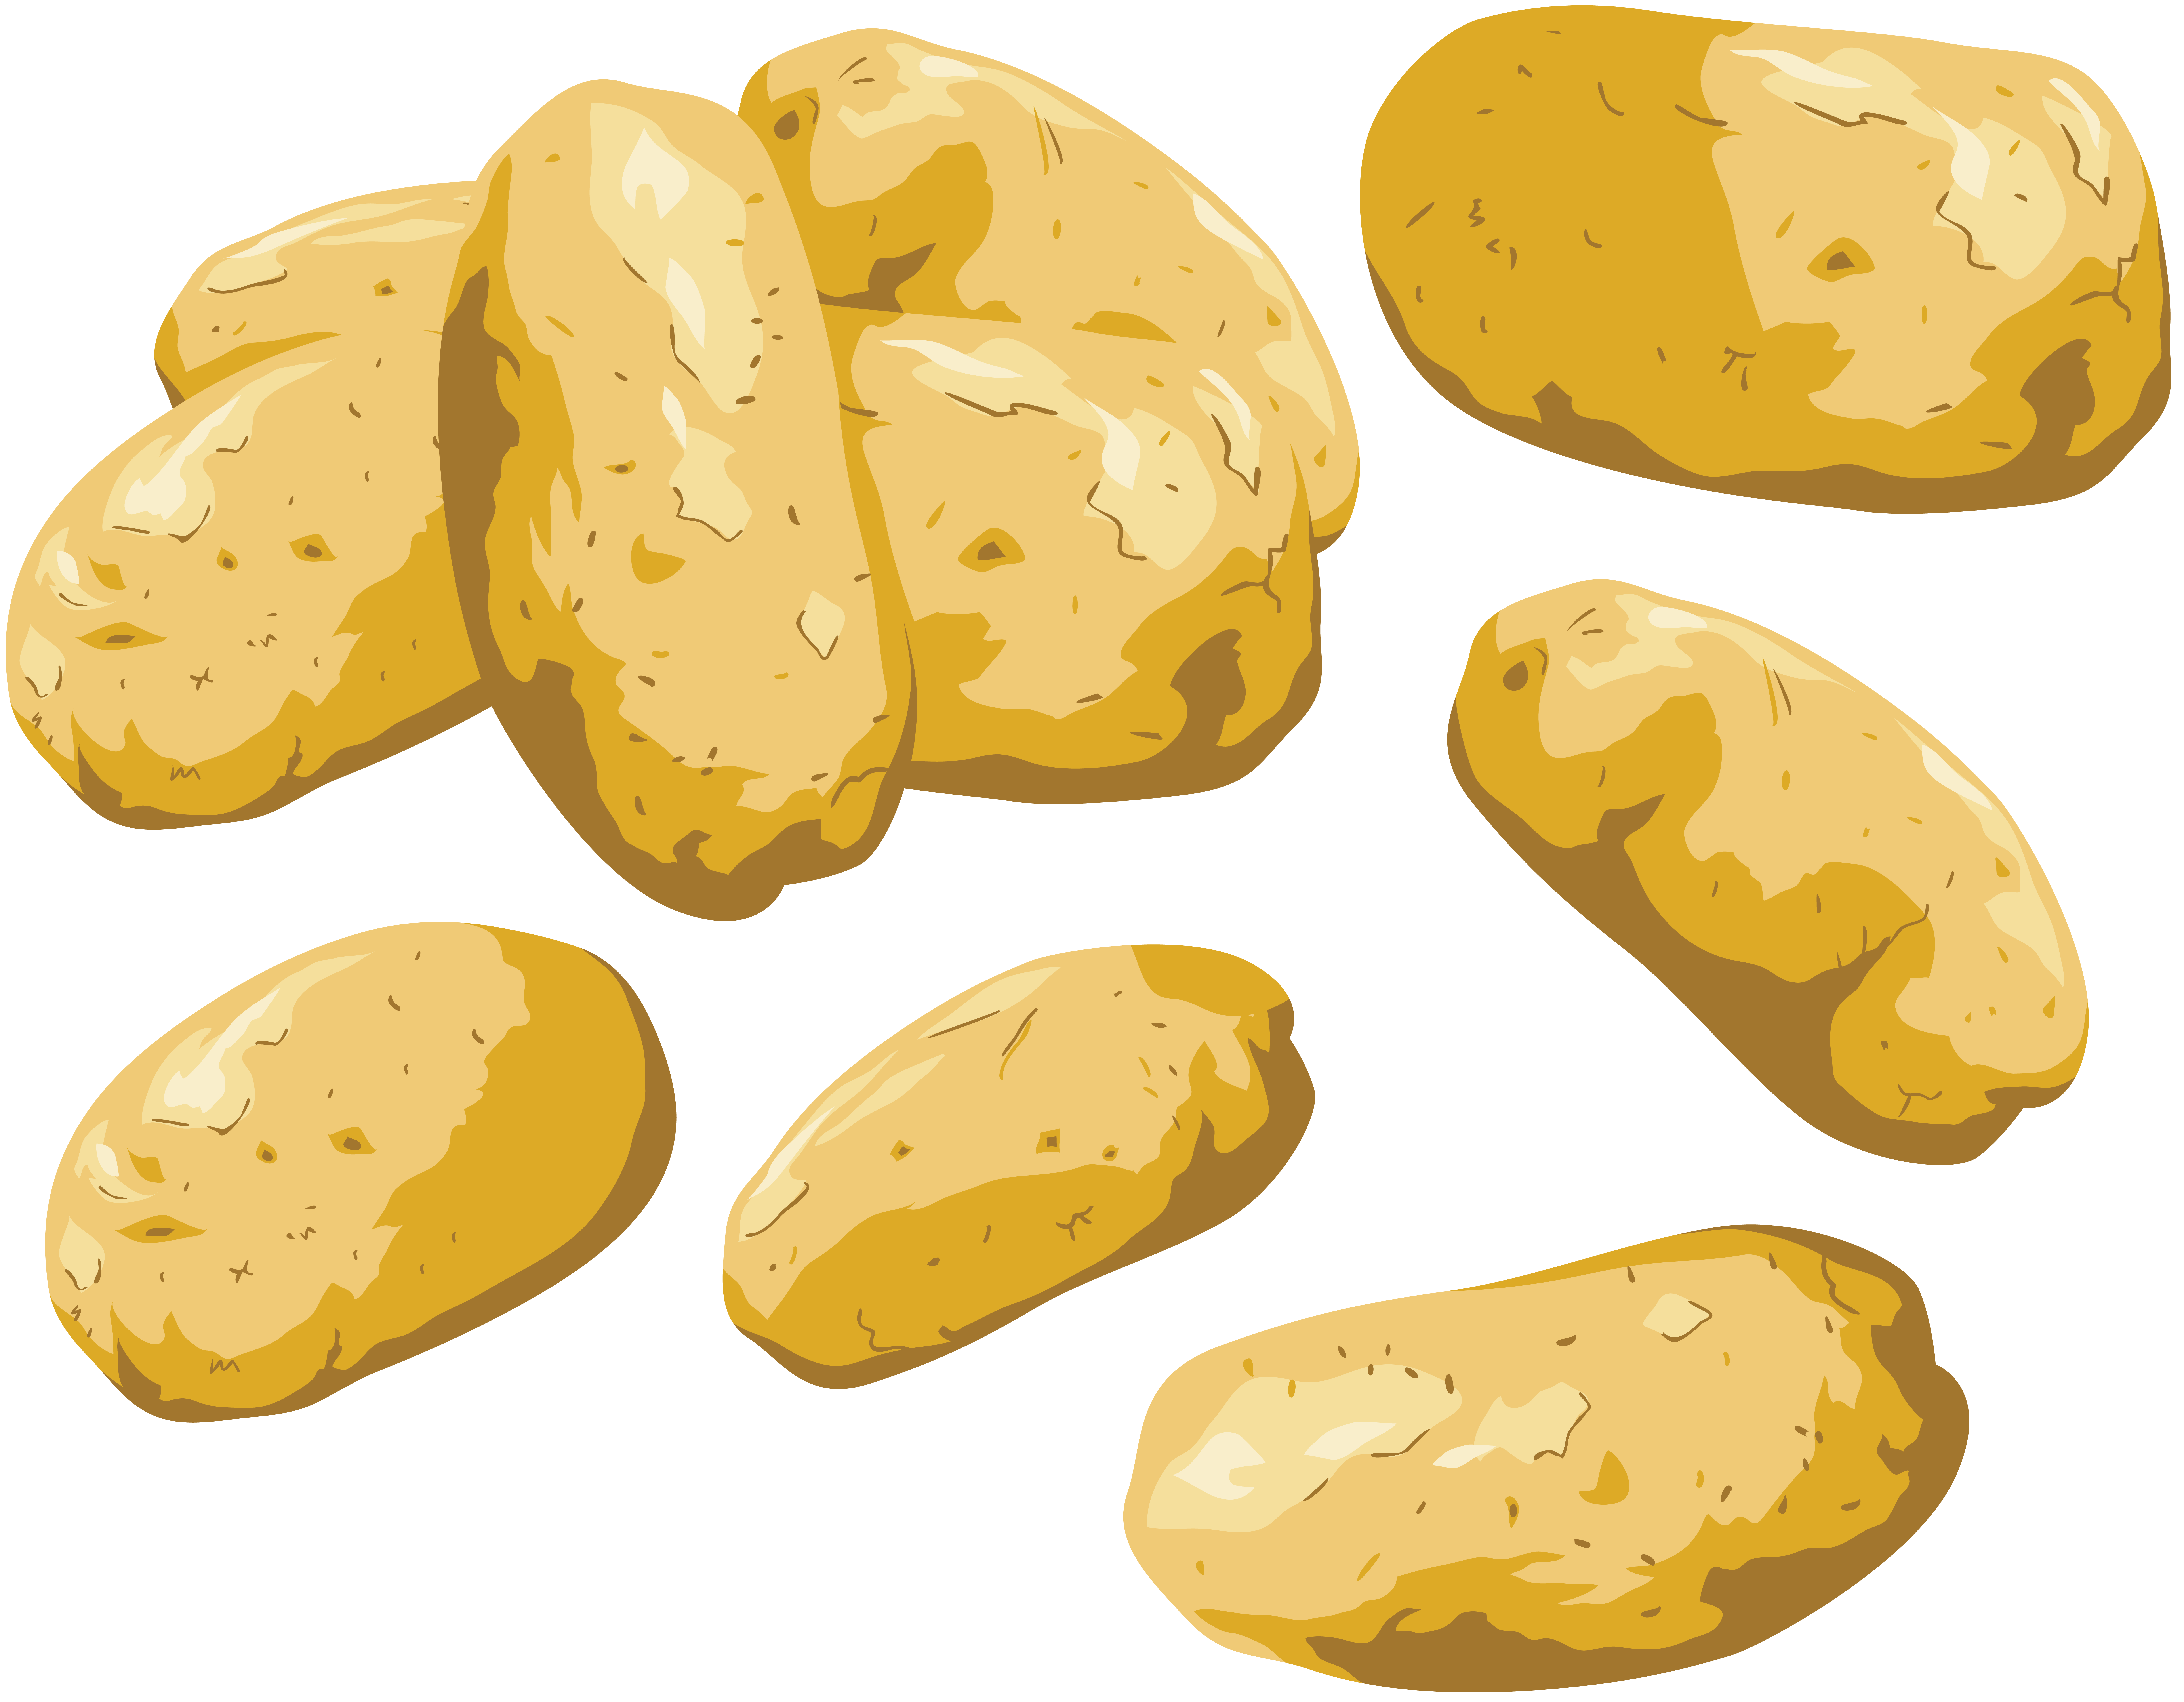 Potatoes PNG picture